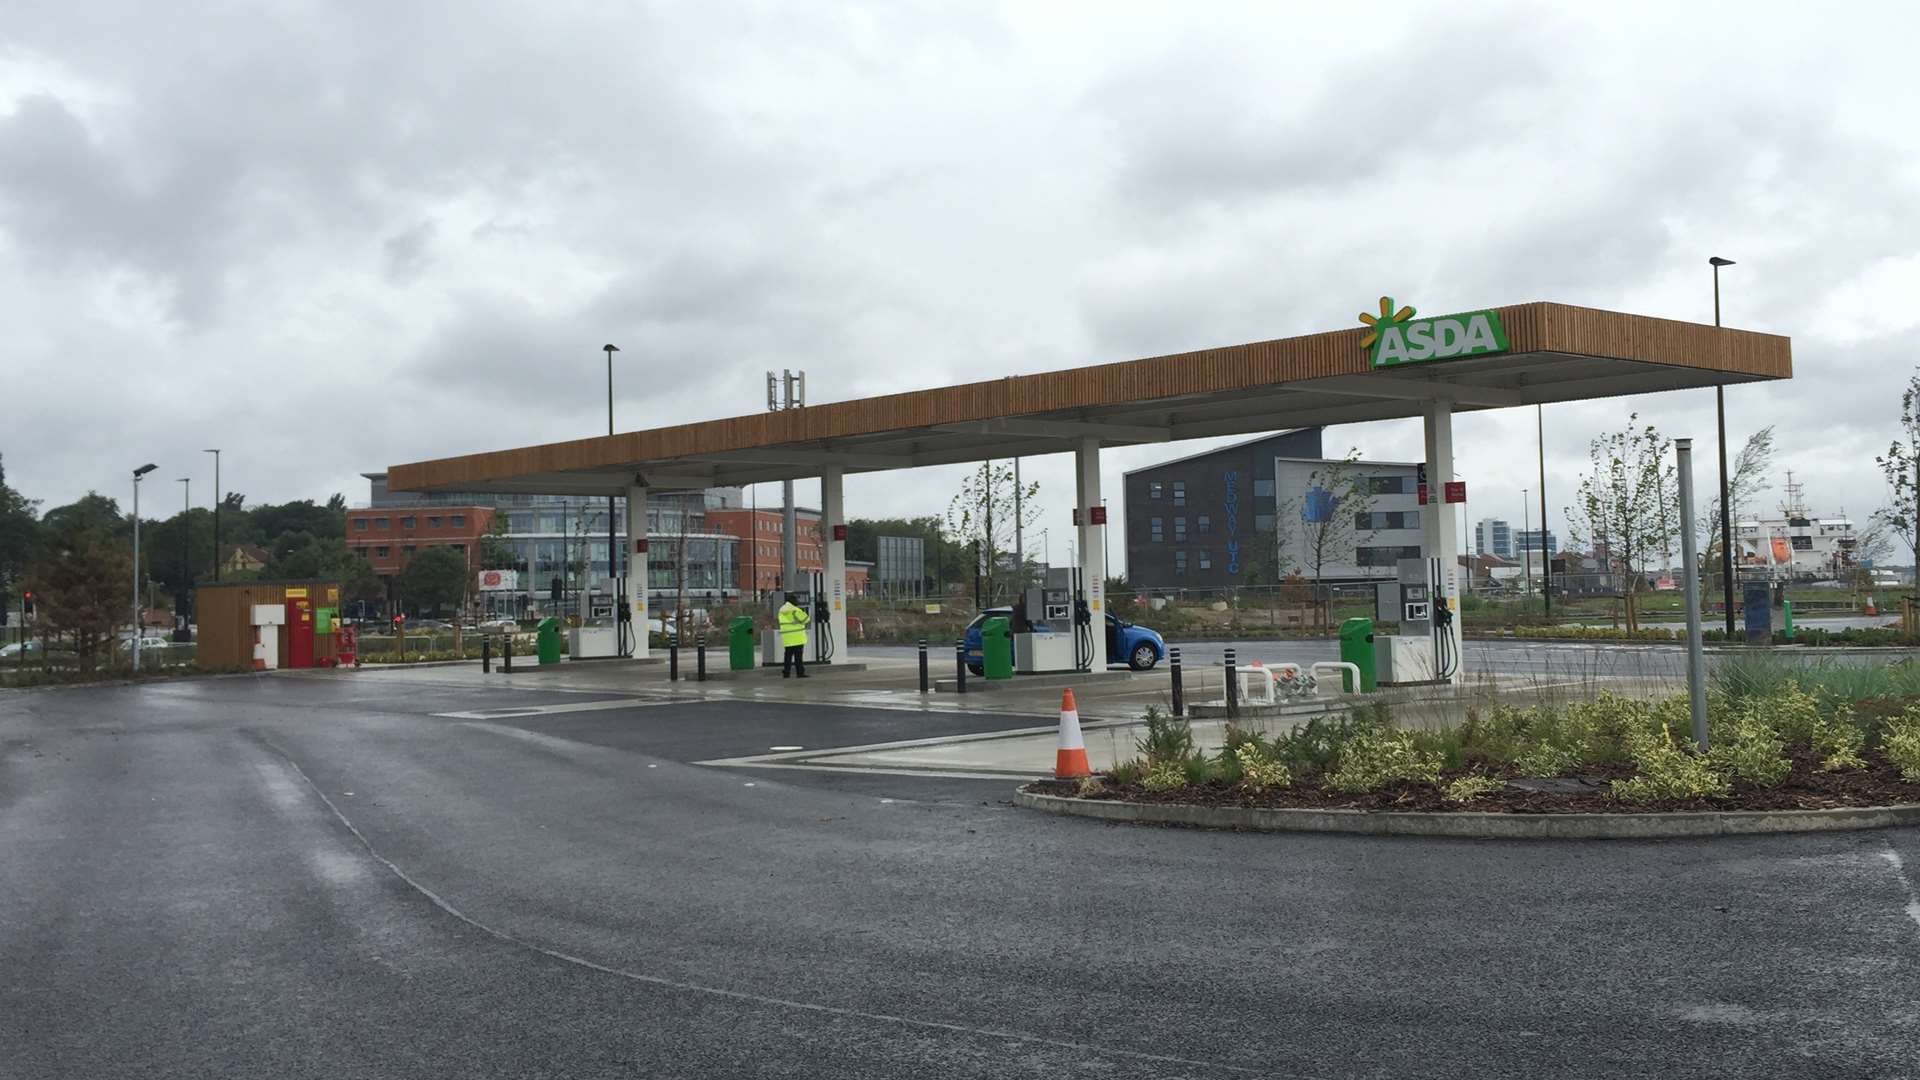 The proposed petrol station will be similar to the pumps at Asda Gillingham Pier